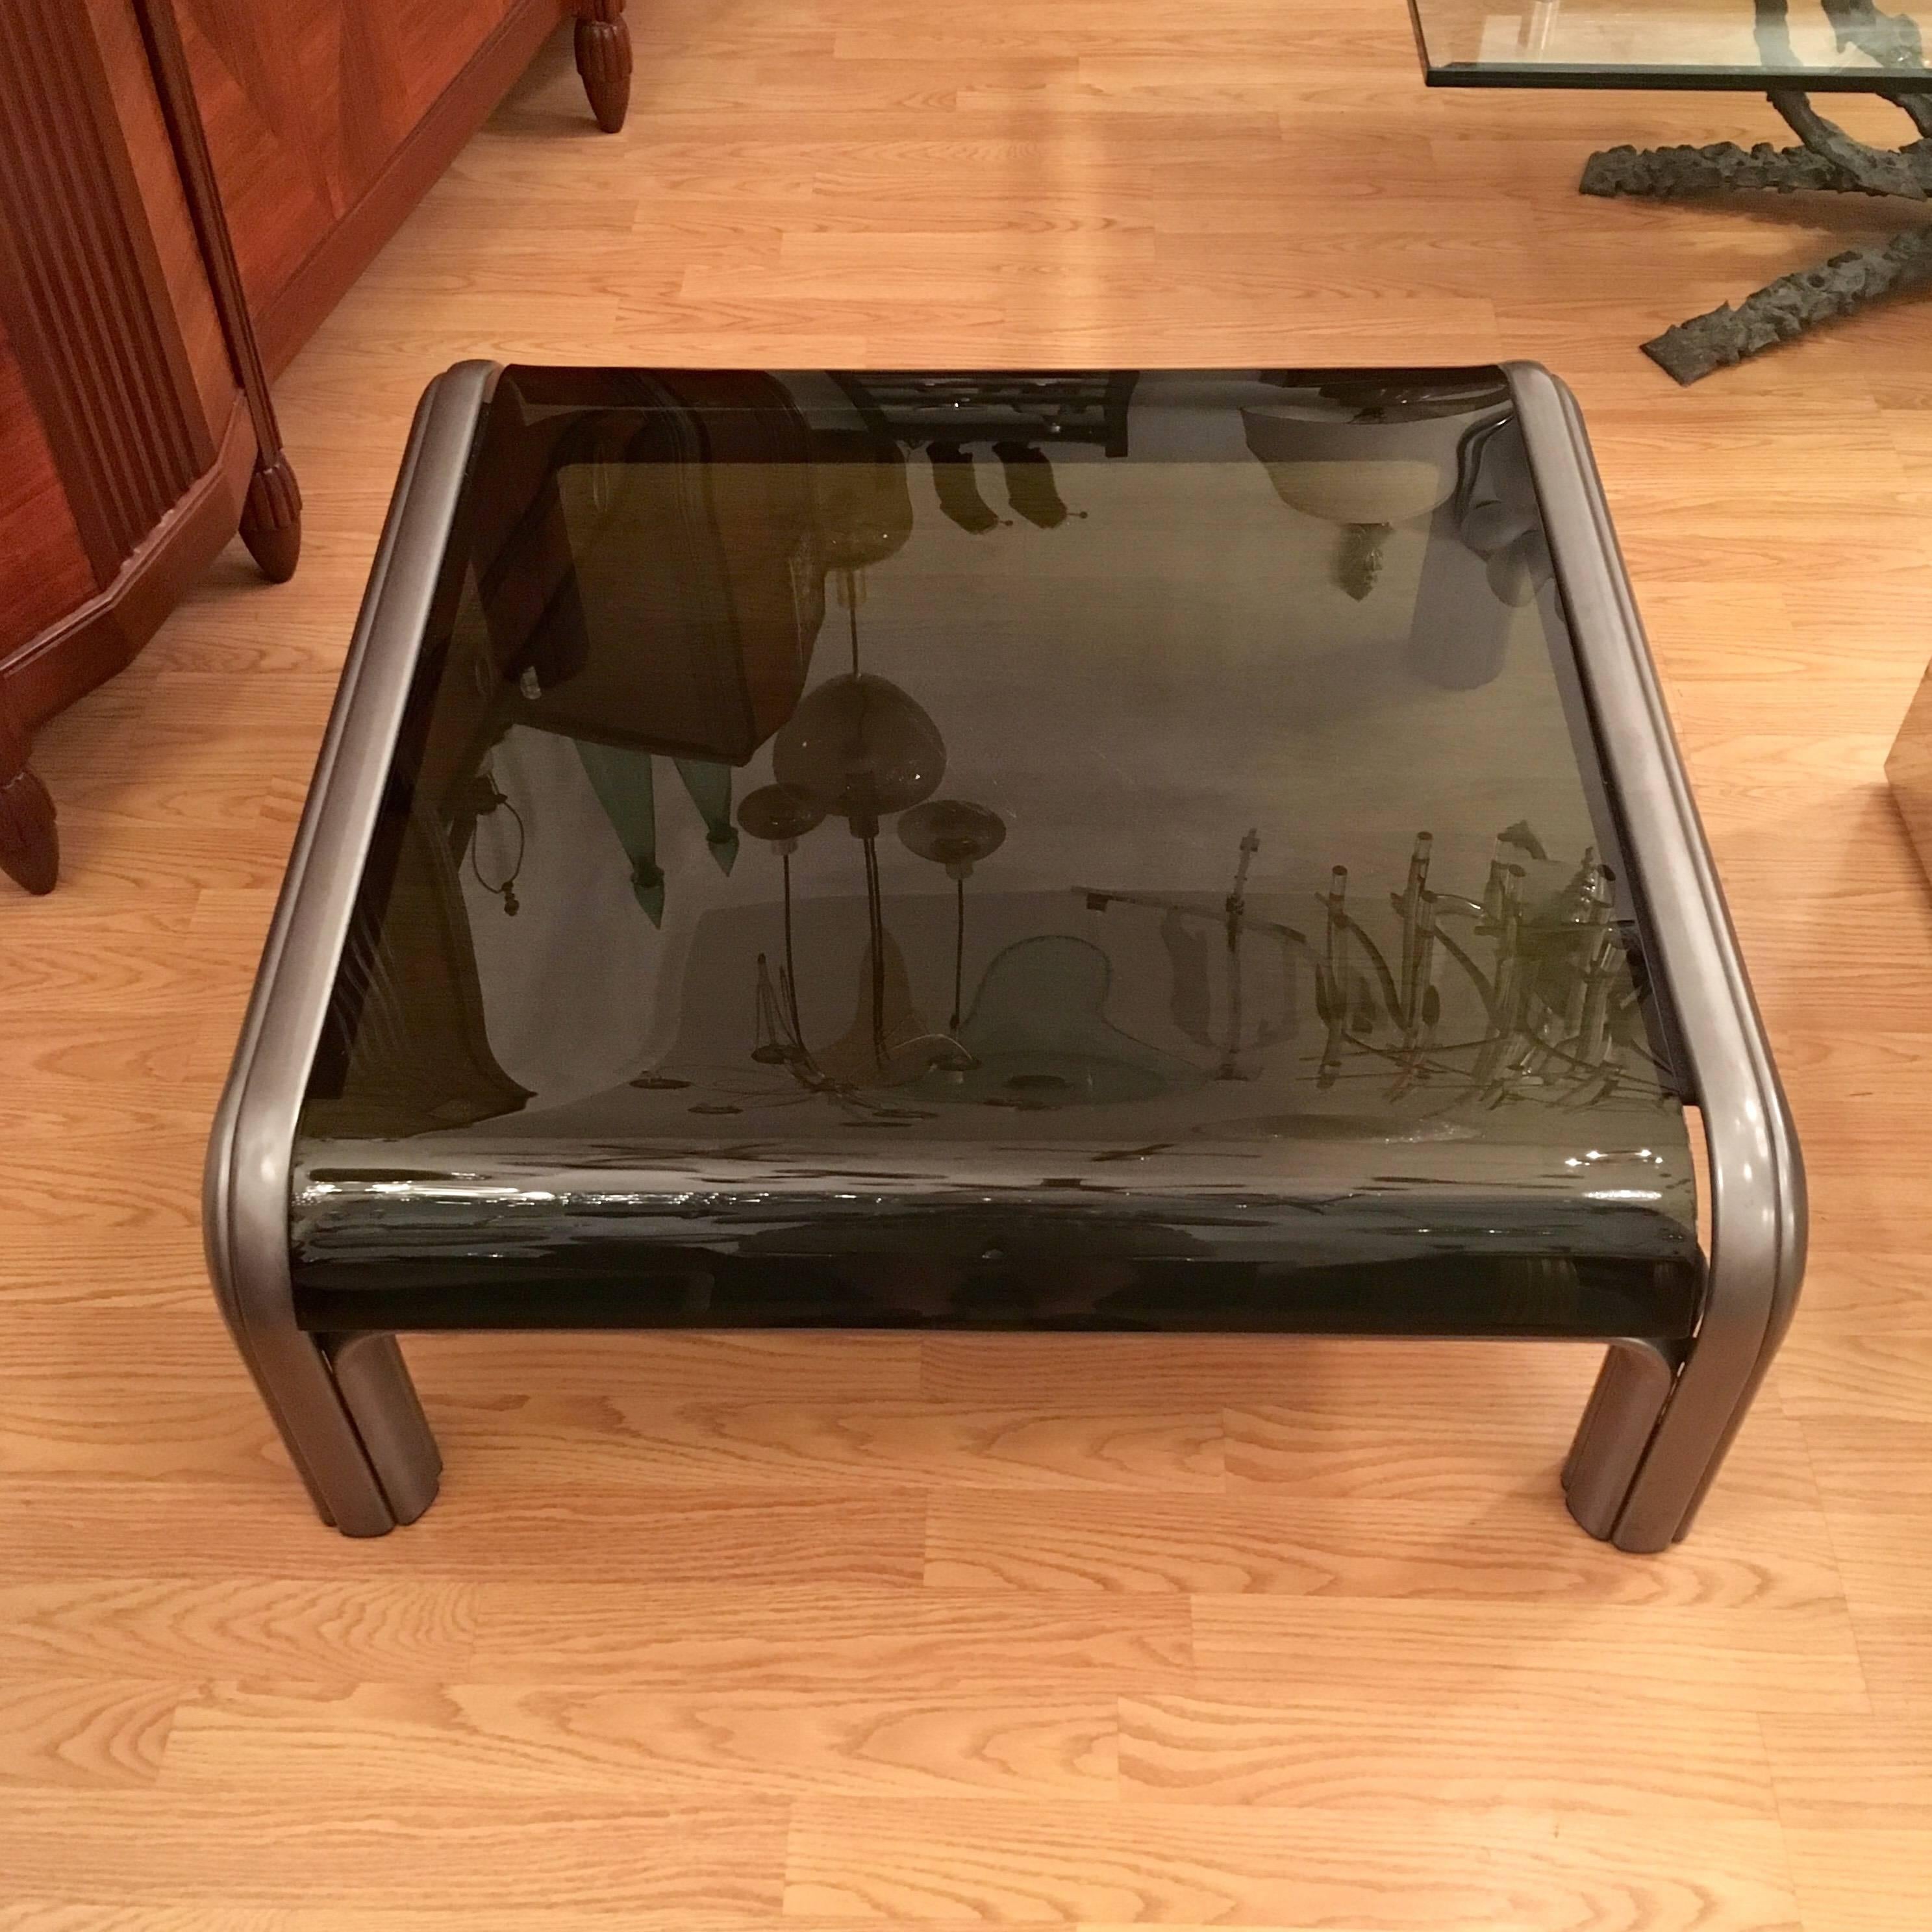 A Gae Aulenti designed for Knoll 1976 coffee table composed of a dark brown enameled steel frame and a curved dark smoked glass top.